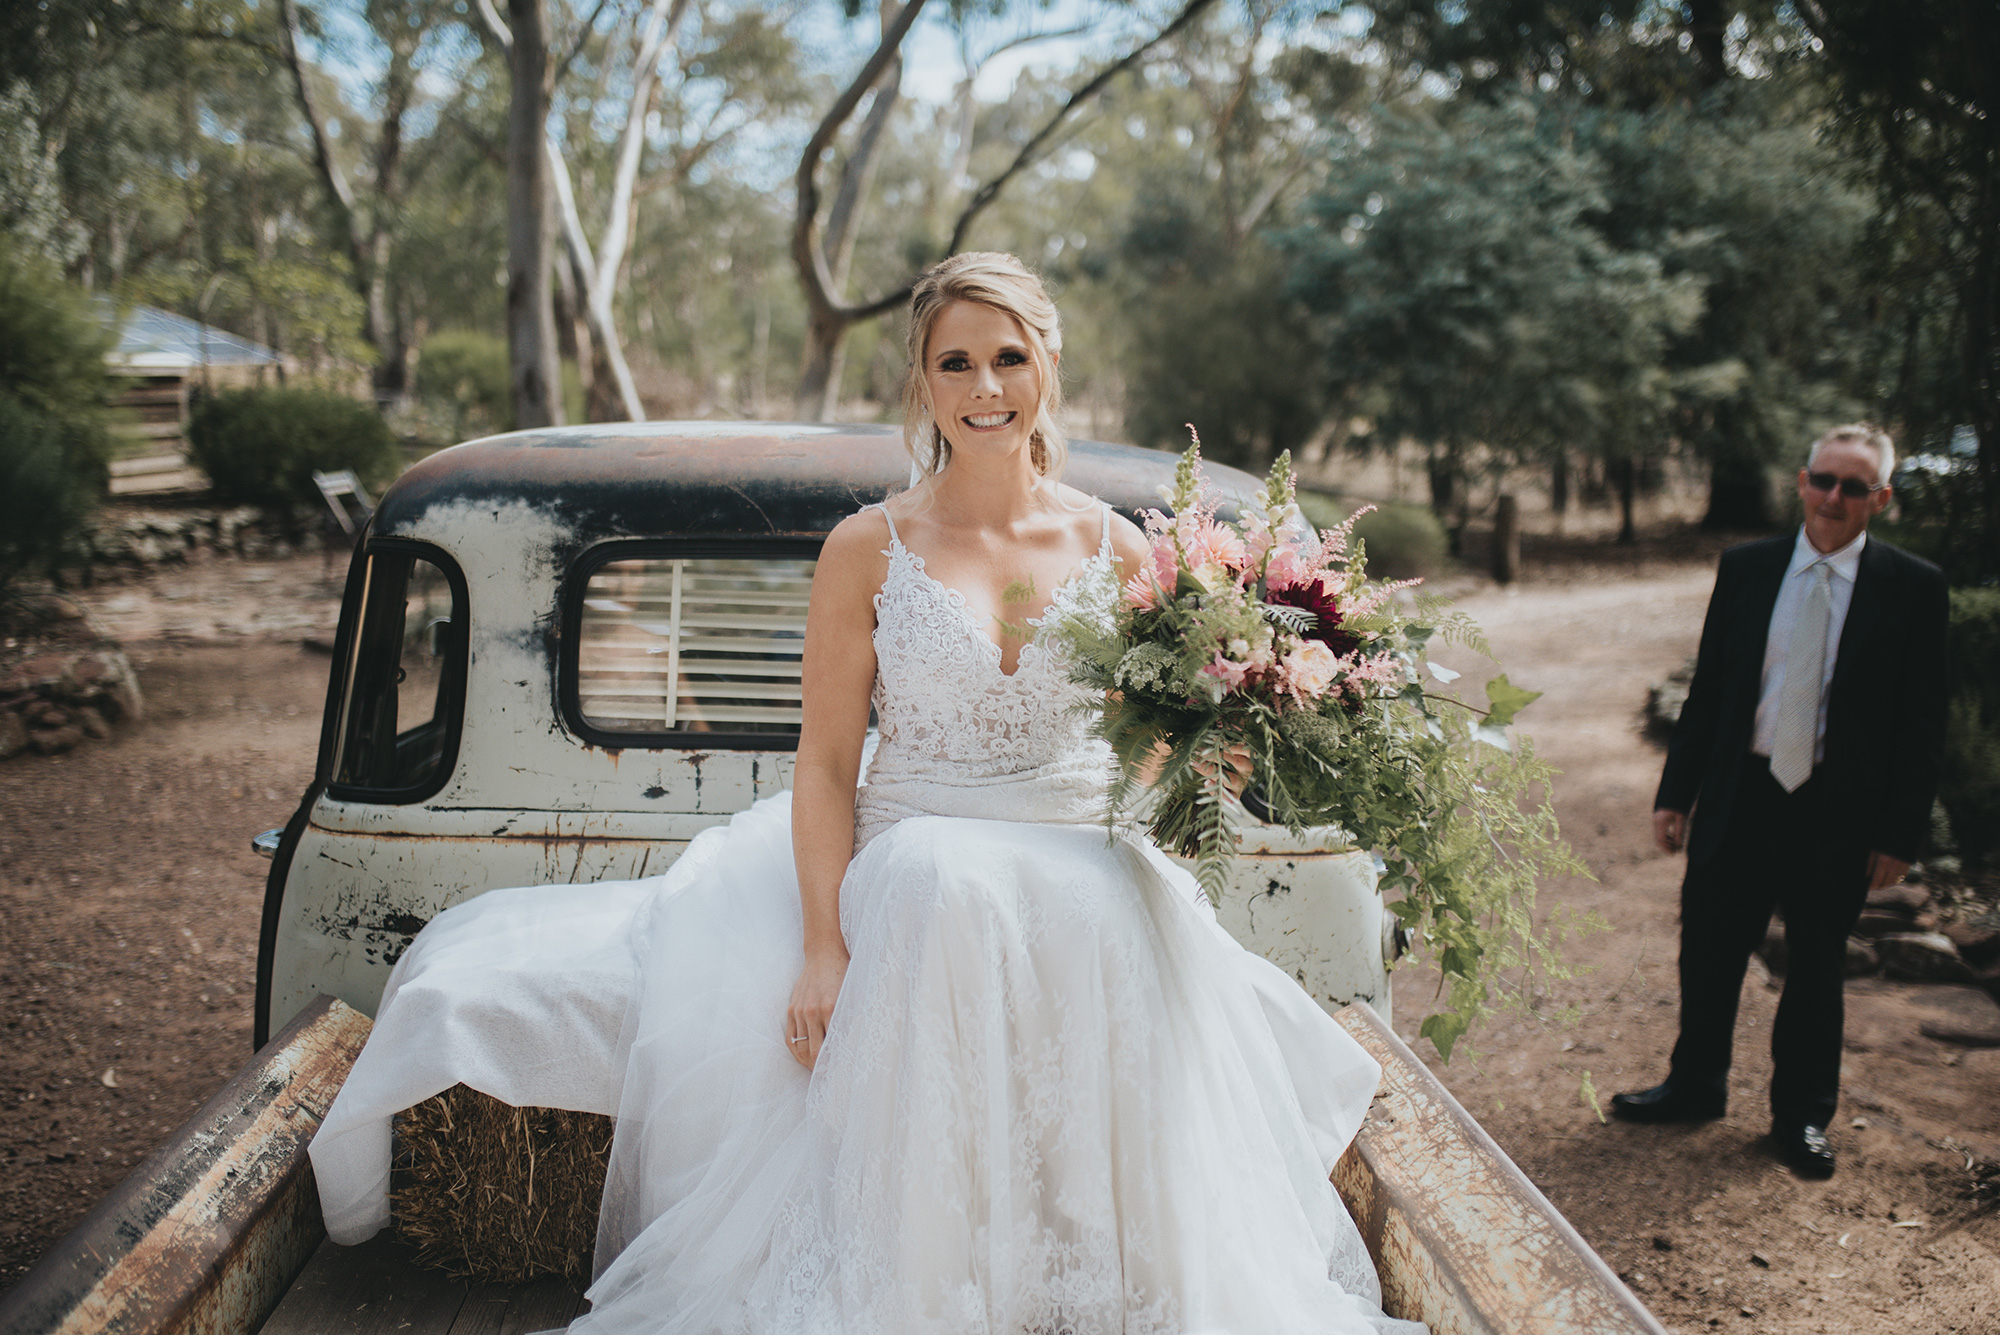 Kate_Tristan_Country-Rustic-Wedding_028